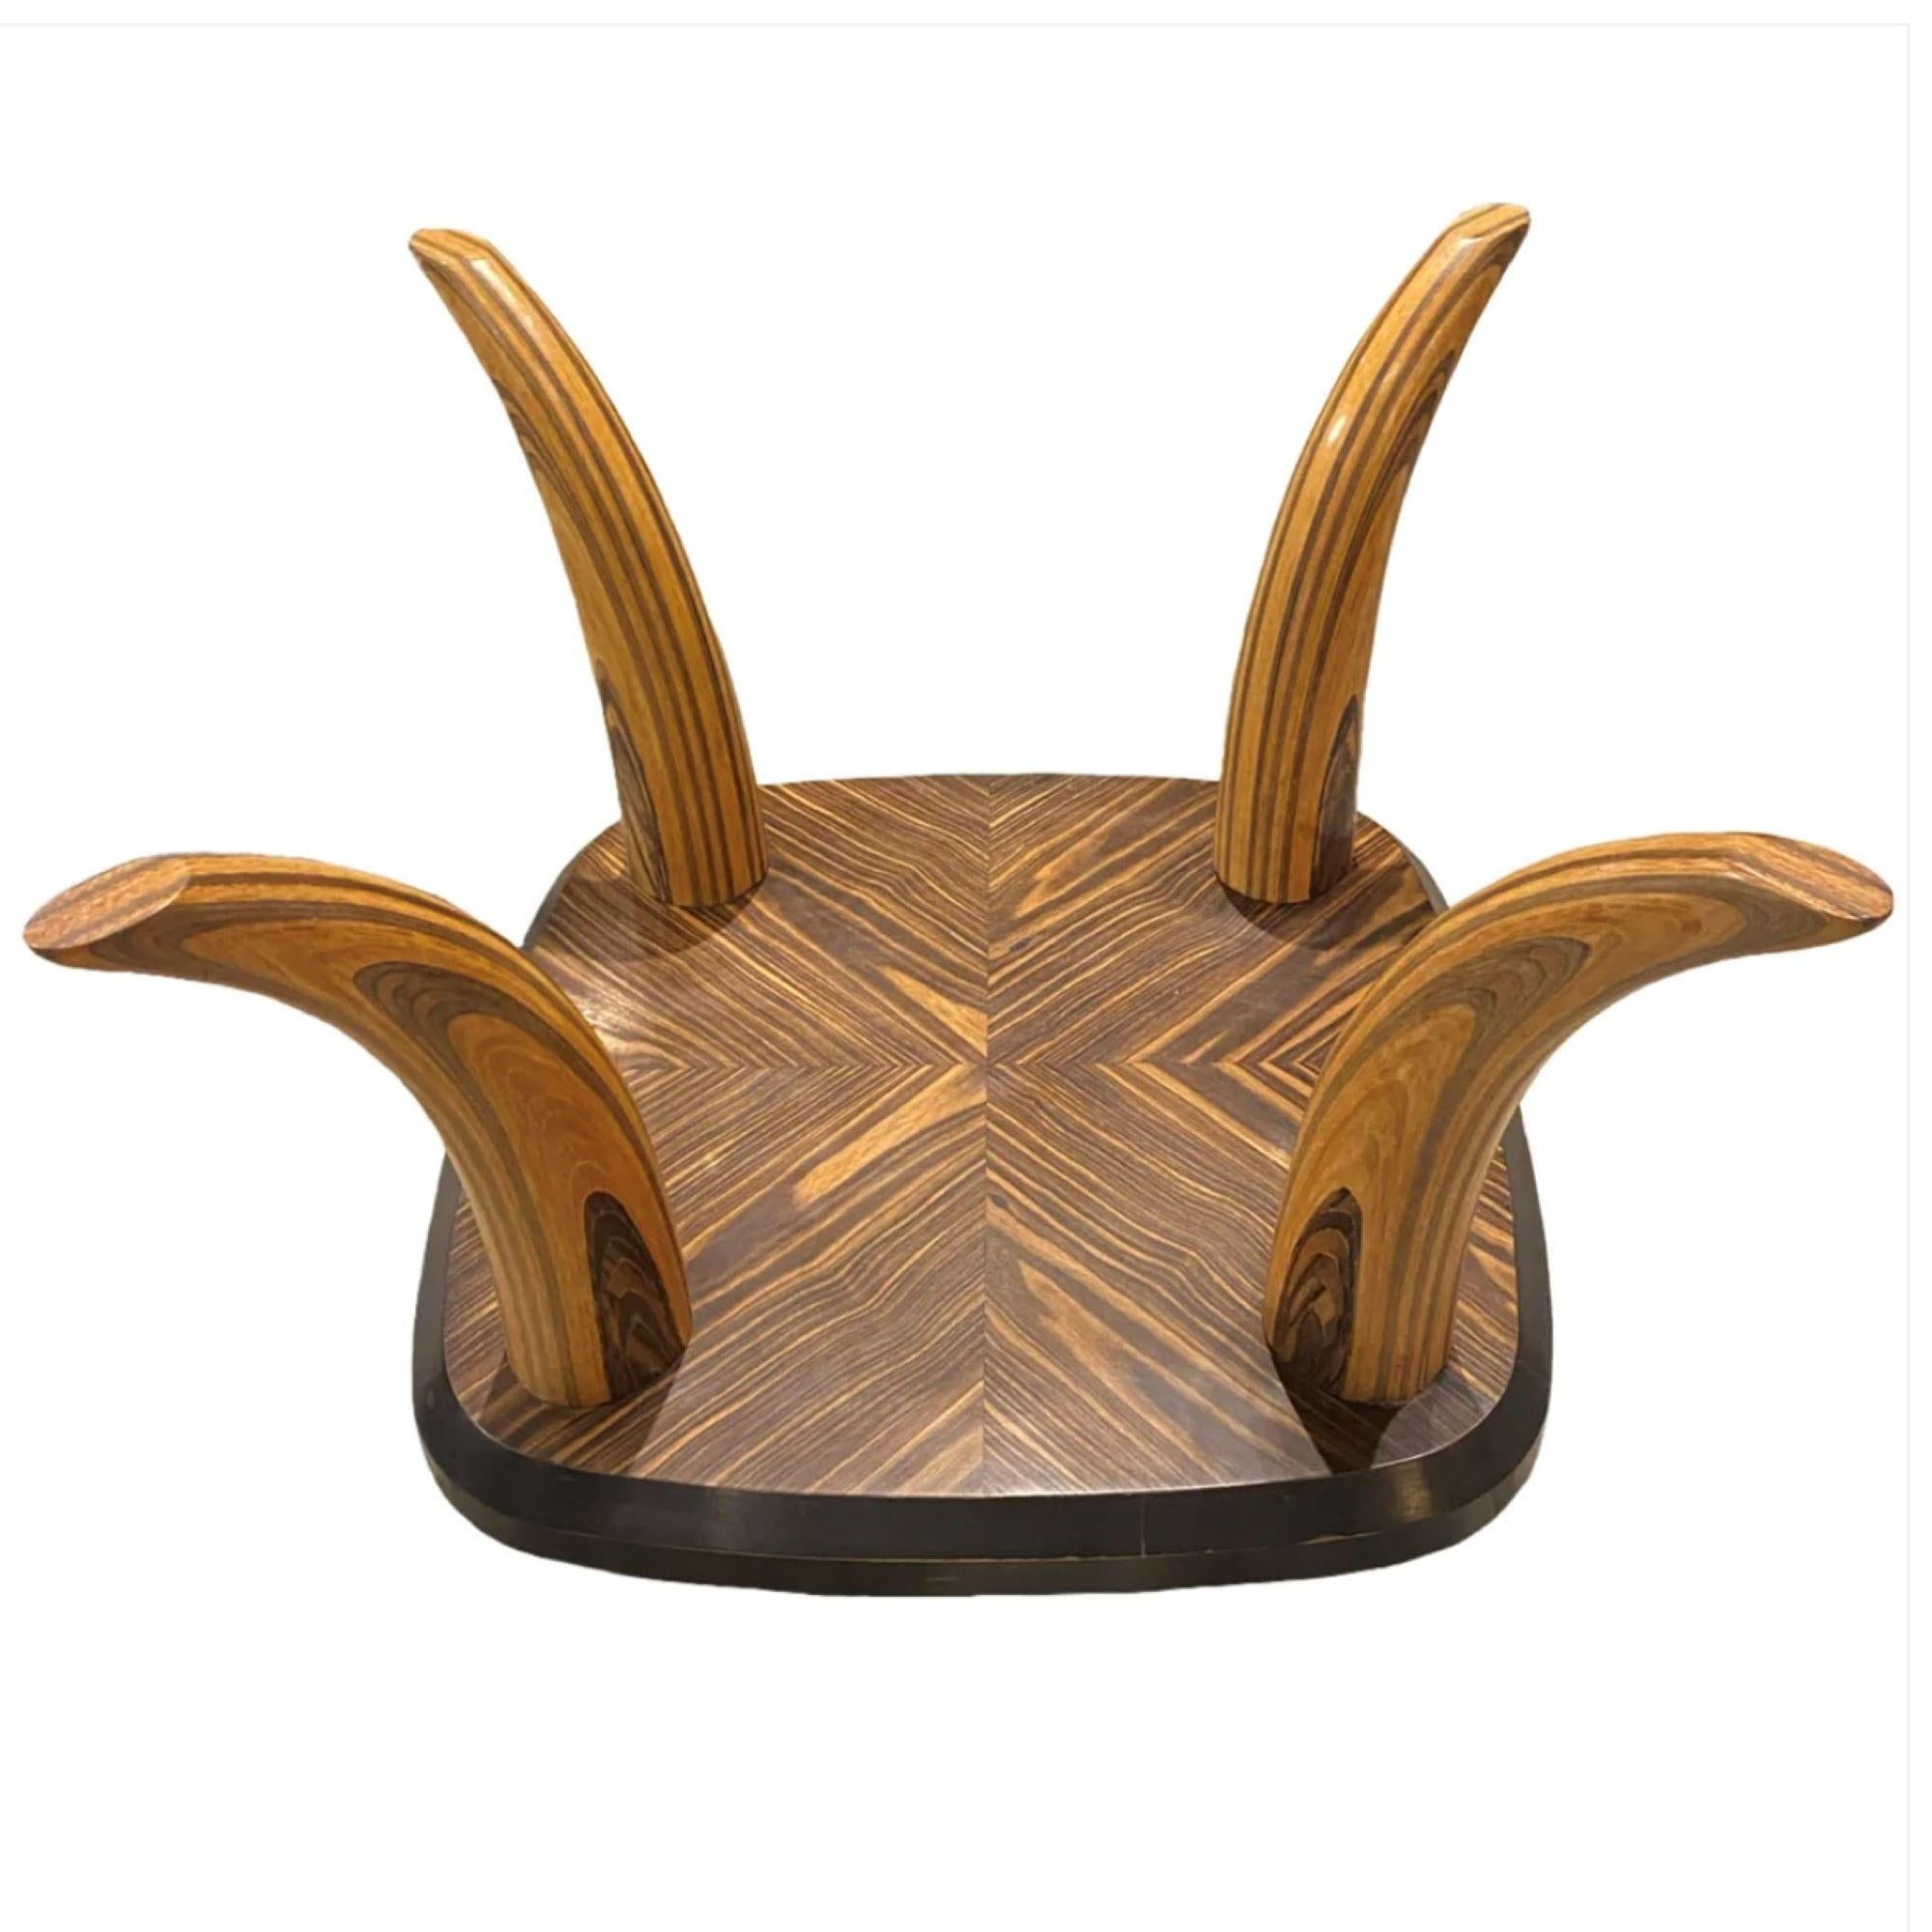 Henredon

Zebra Wood Faux Tusk Coffee Table

c. 1970

Overall Dimensions with Glass:

     Height: 16.5